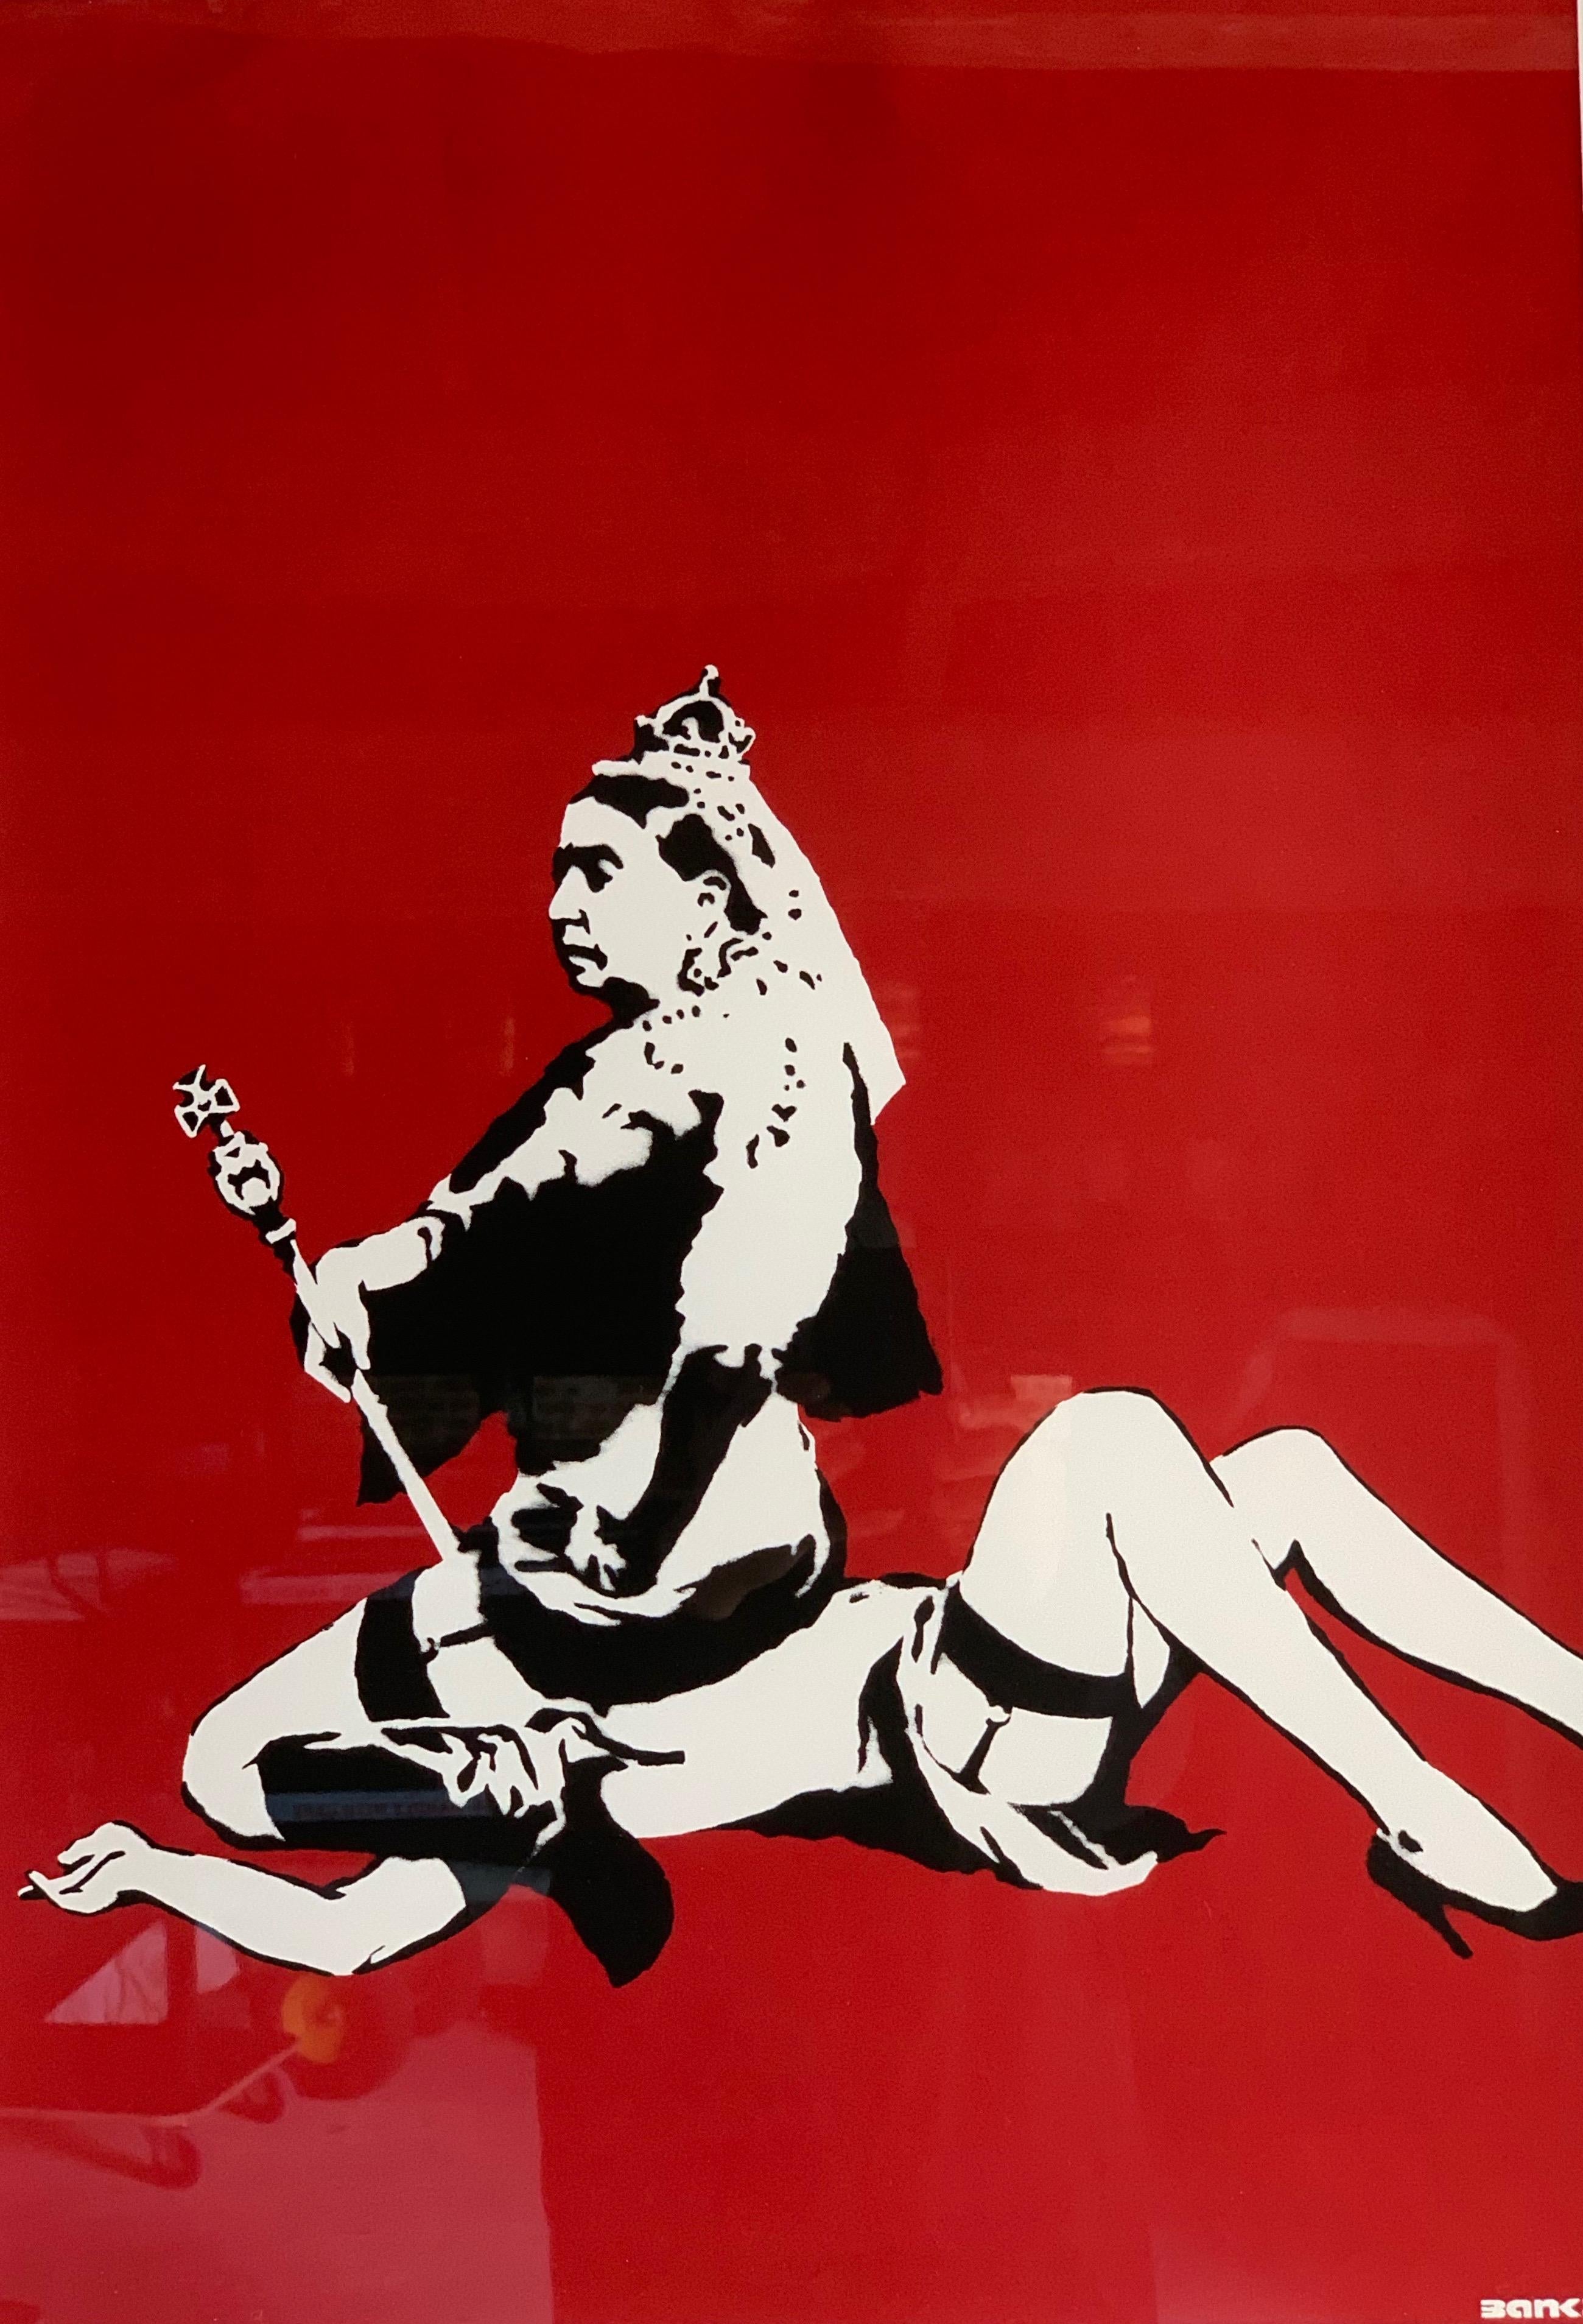 Banksy Queen Vic (British, b.1974)

Queen Vic is an early Banksy artwork printed by Pictures On Walls in 2003. ... This irreverent stencil image depicts Queen Victoria, England's monarch from 1837 until her death in 1901, as a lesbian engaged in an